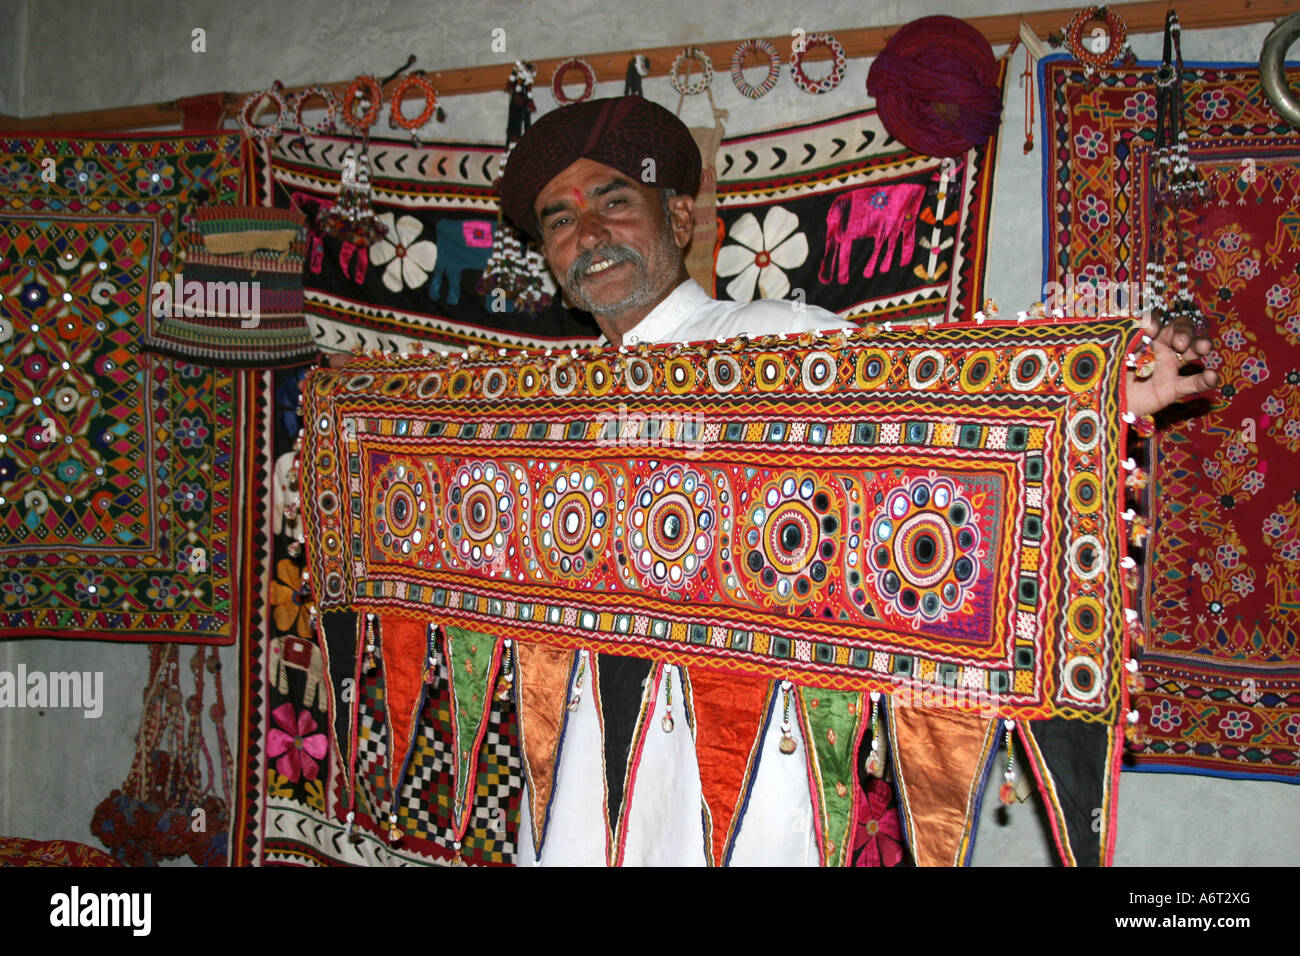 Example of  traditional embroidery made by  a member of the Rabari Tribe in `the Litttle Rann of Kutch,Gujarat,India. Stock Photo